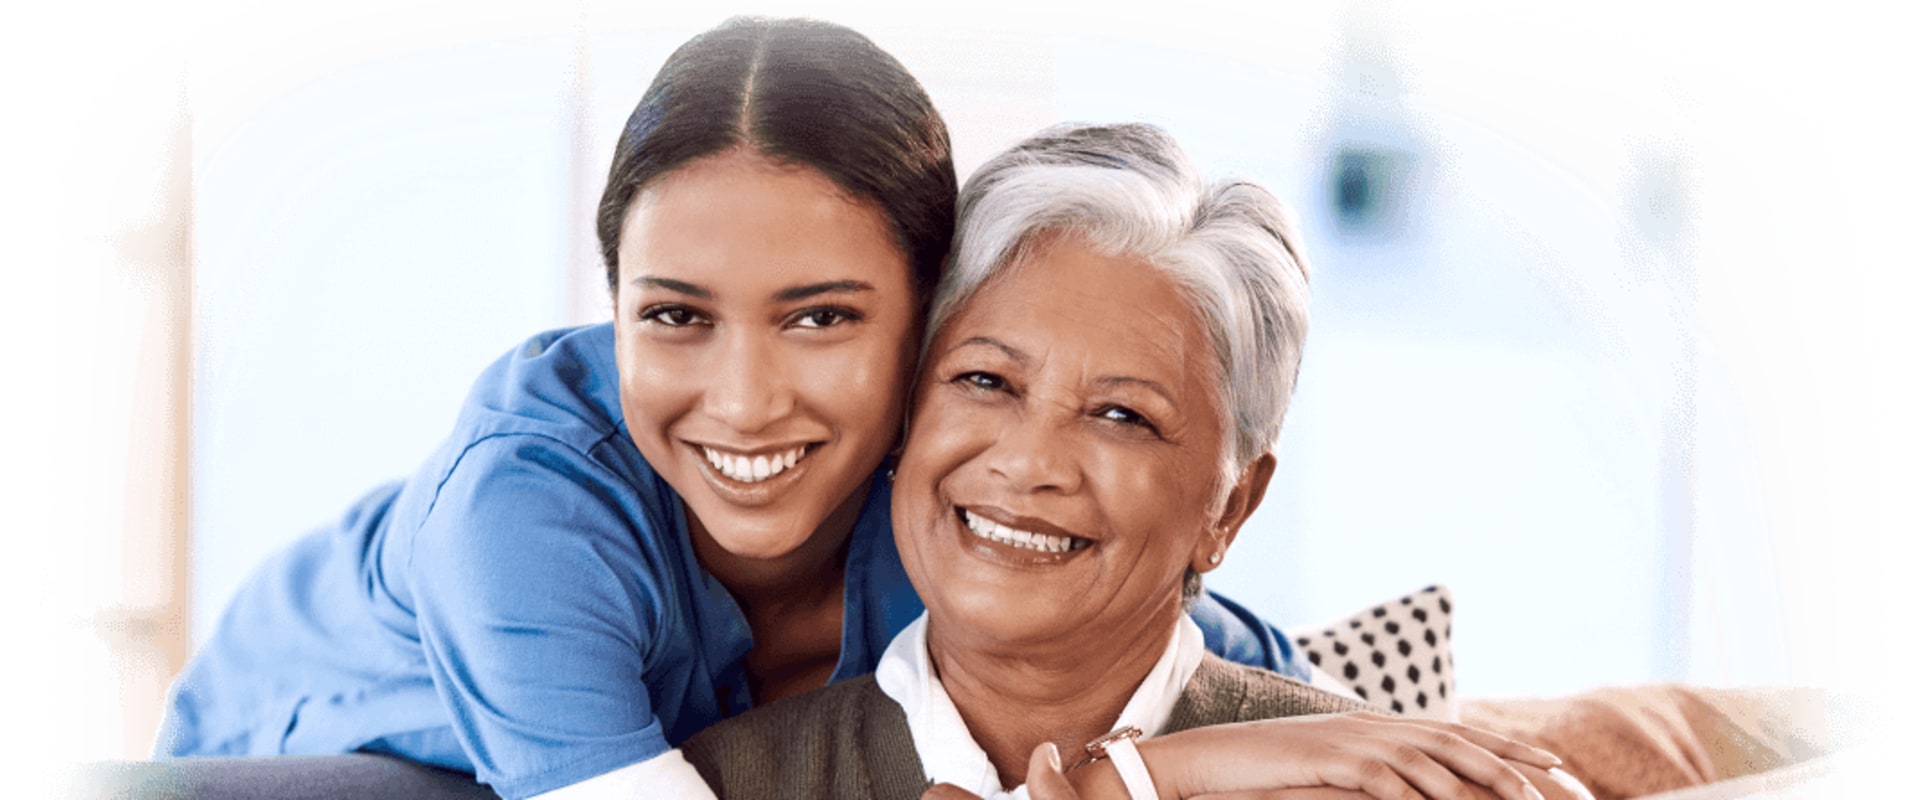 Finding Home Health Care Aides and Nurses for Seniors in Orange County